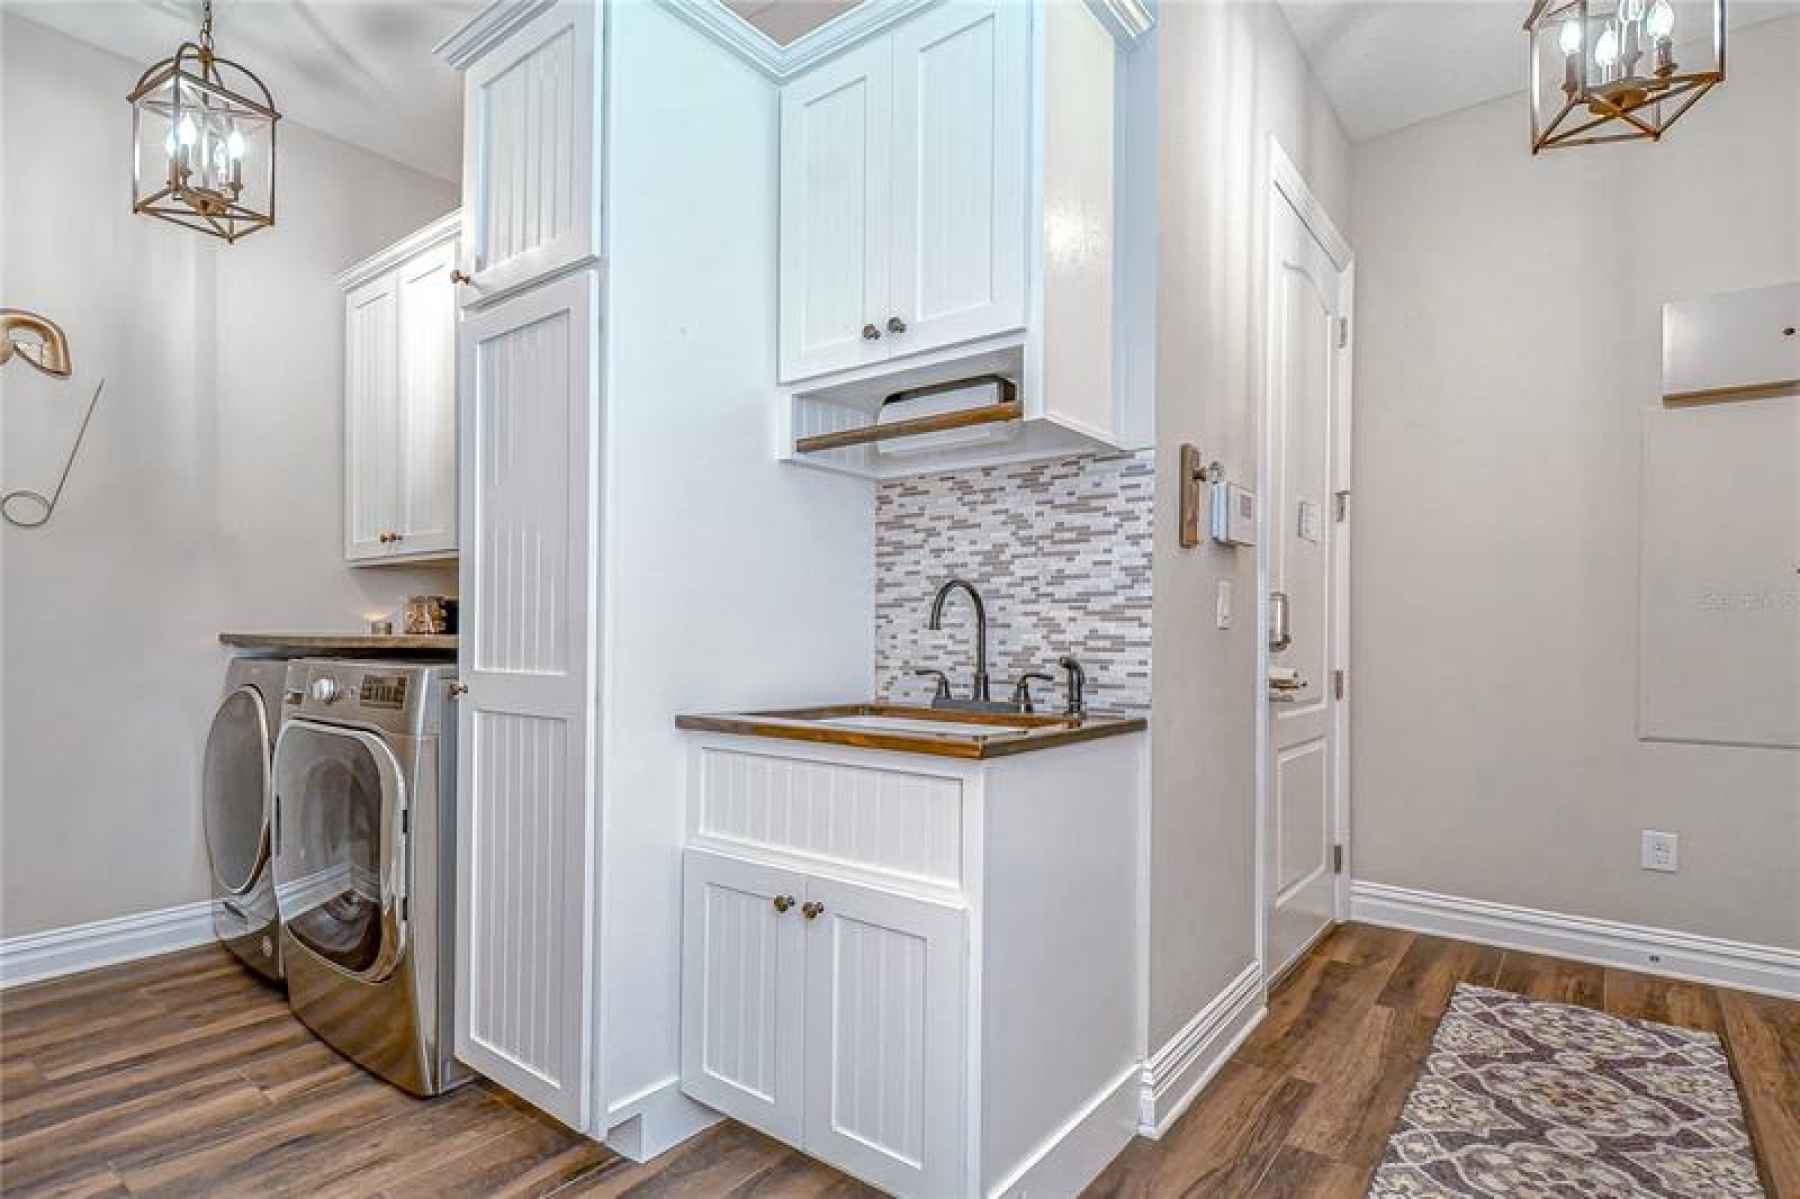 This laundry room is like no other!